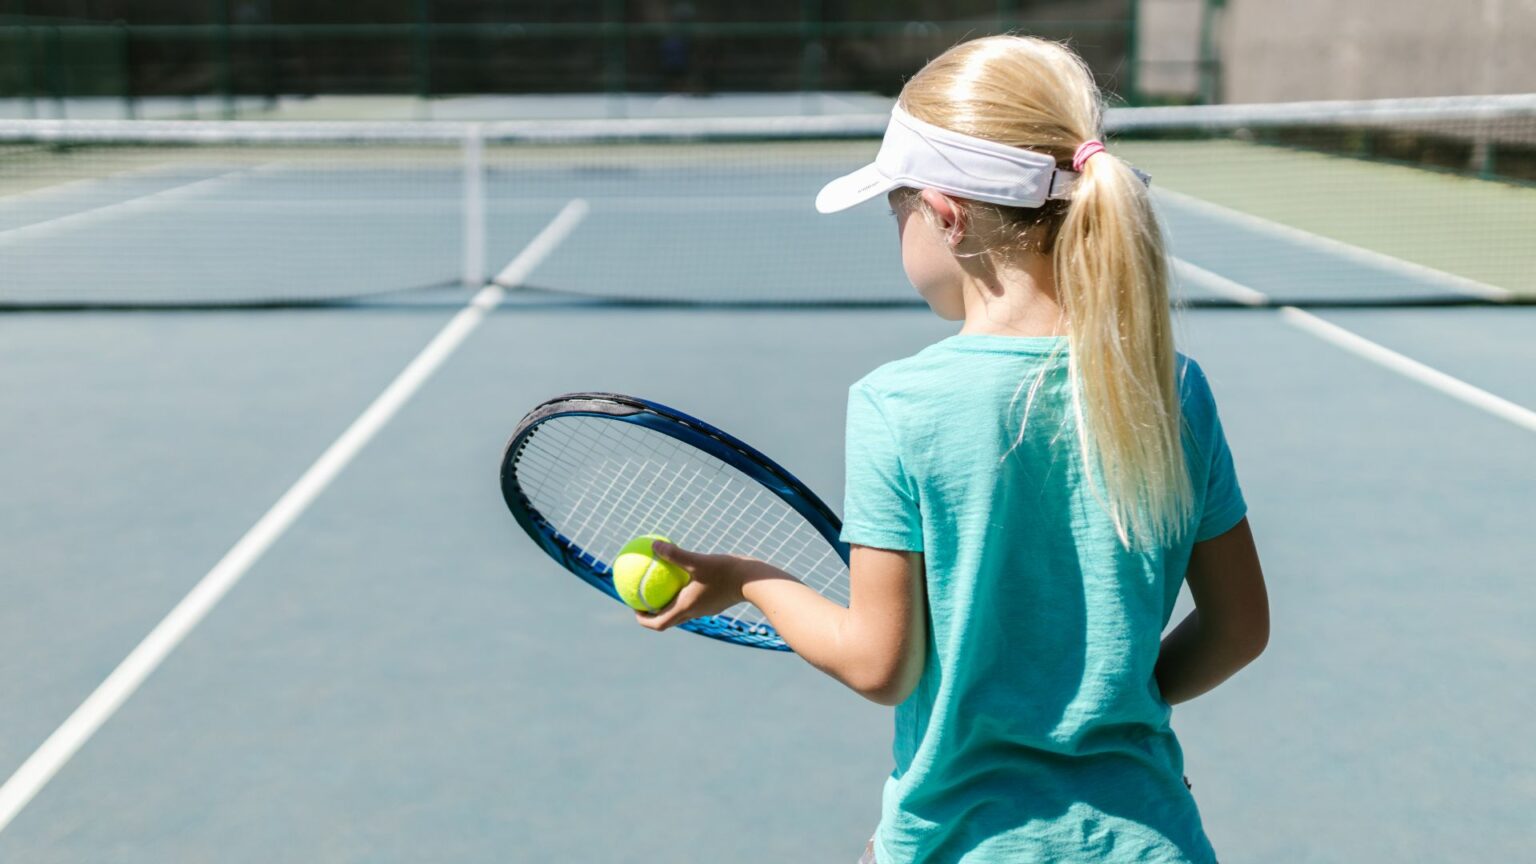 How old should a child be before you buy a tennis racket